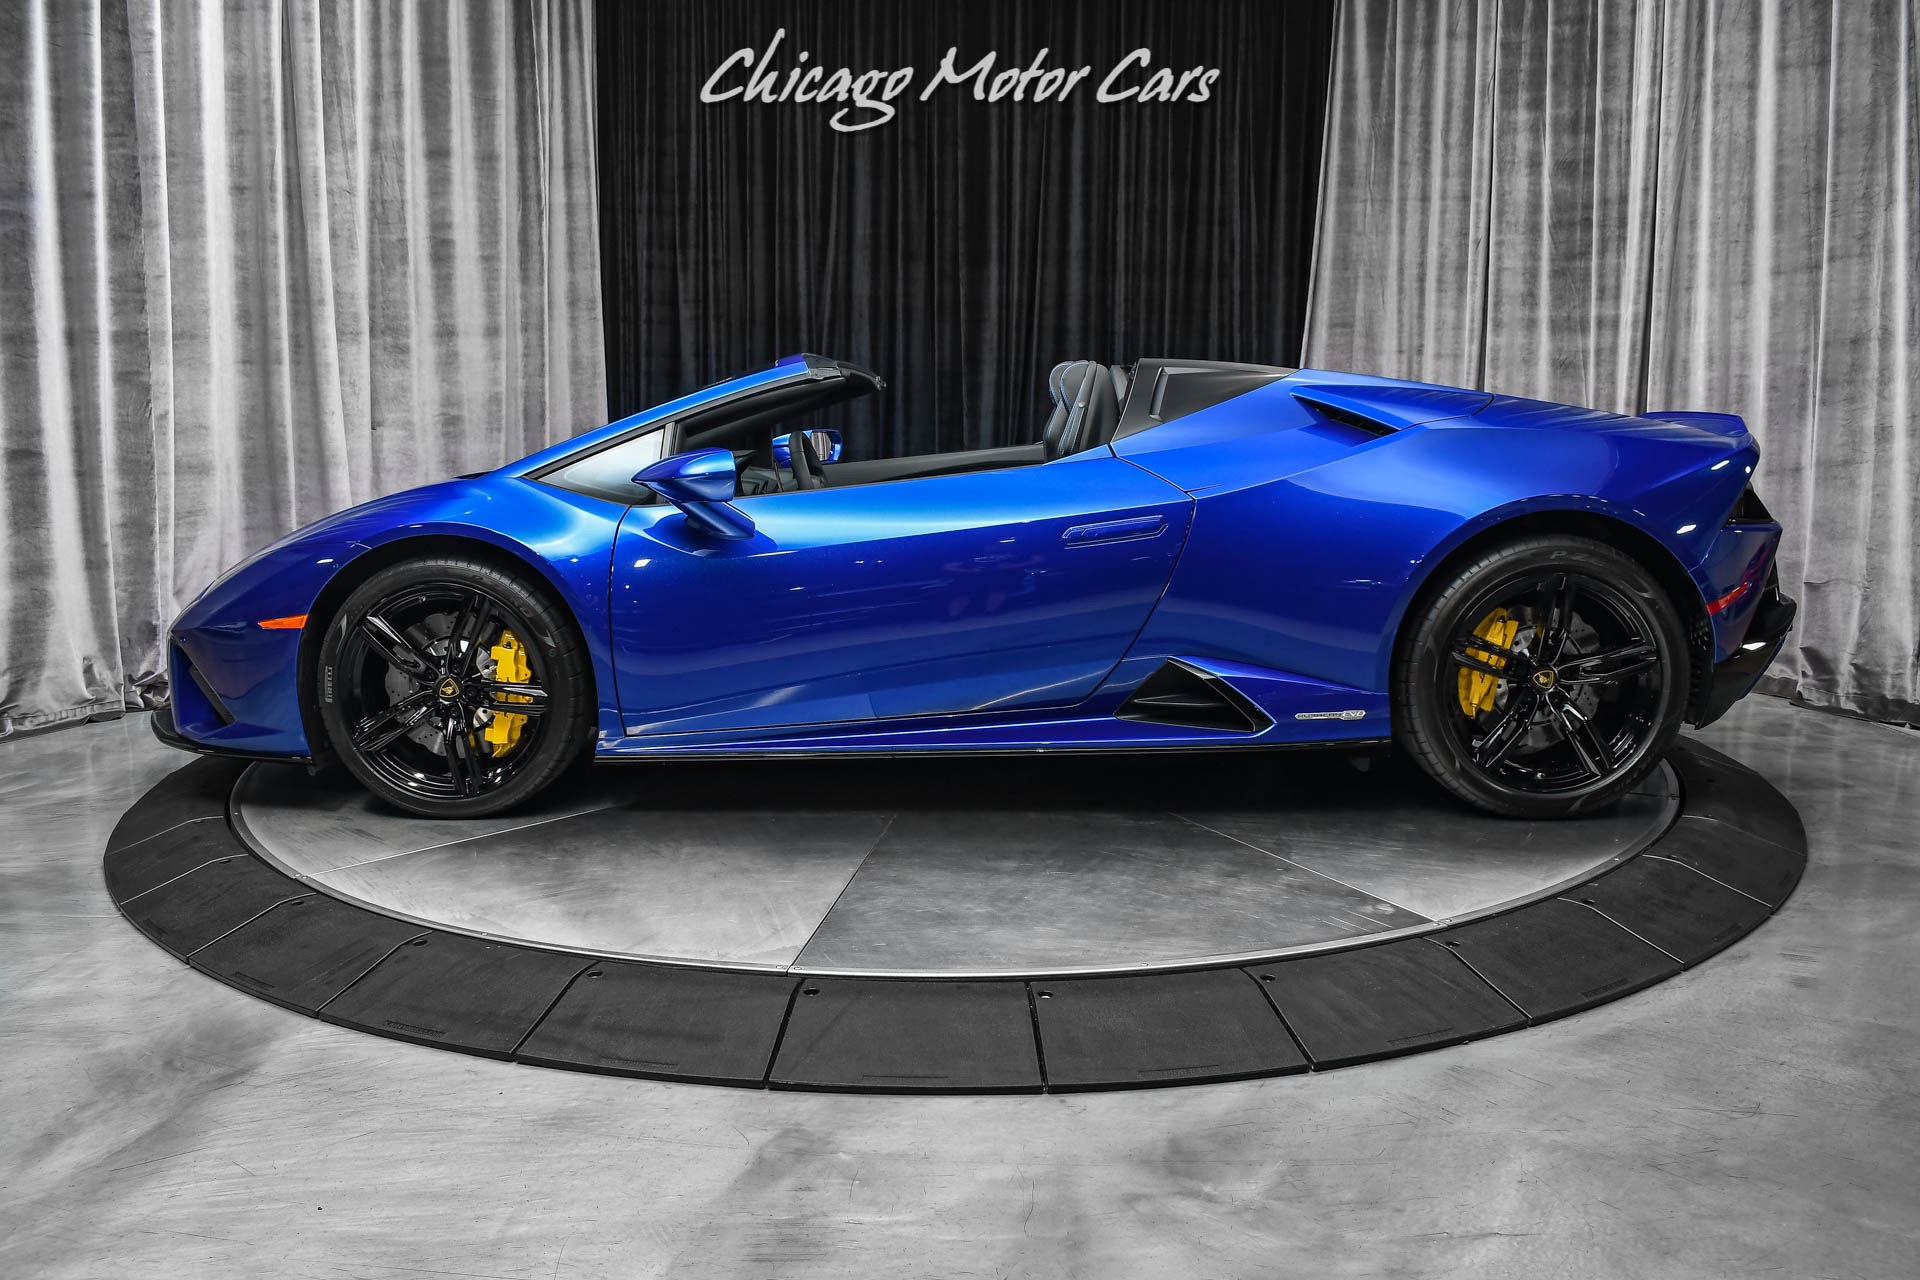 Used 2021 Lamborghini Huracan EVO Spyder Stunning Blu Sideris Paint!  Q-Citura Stitching! For Sale (Special Pricing) | Chicago Motor Cars Stock  #19116